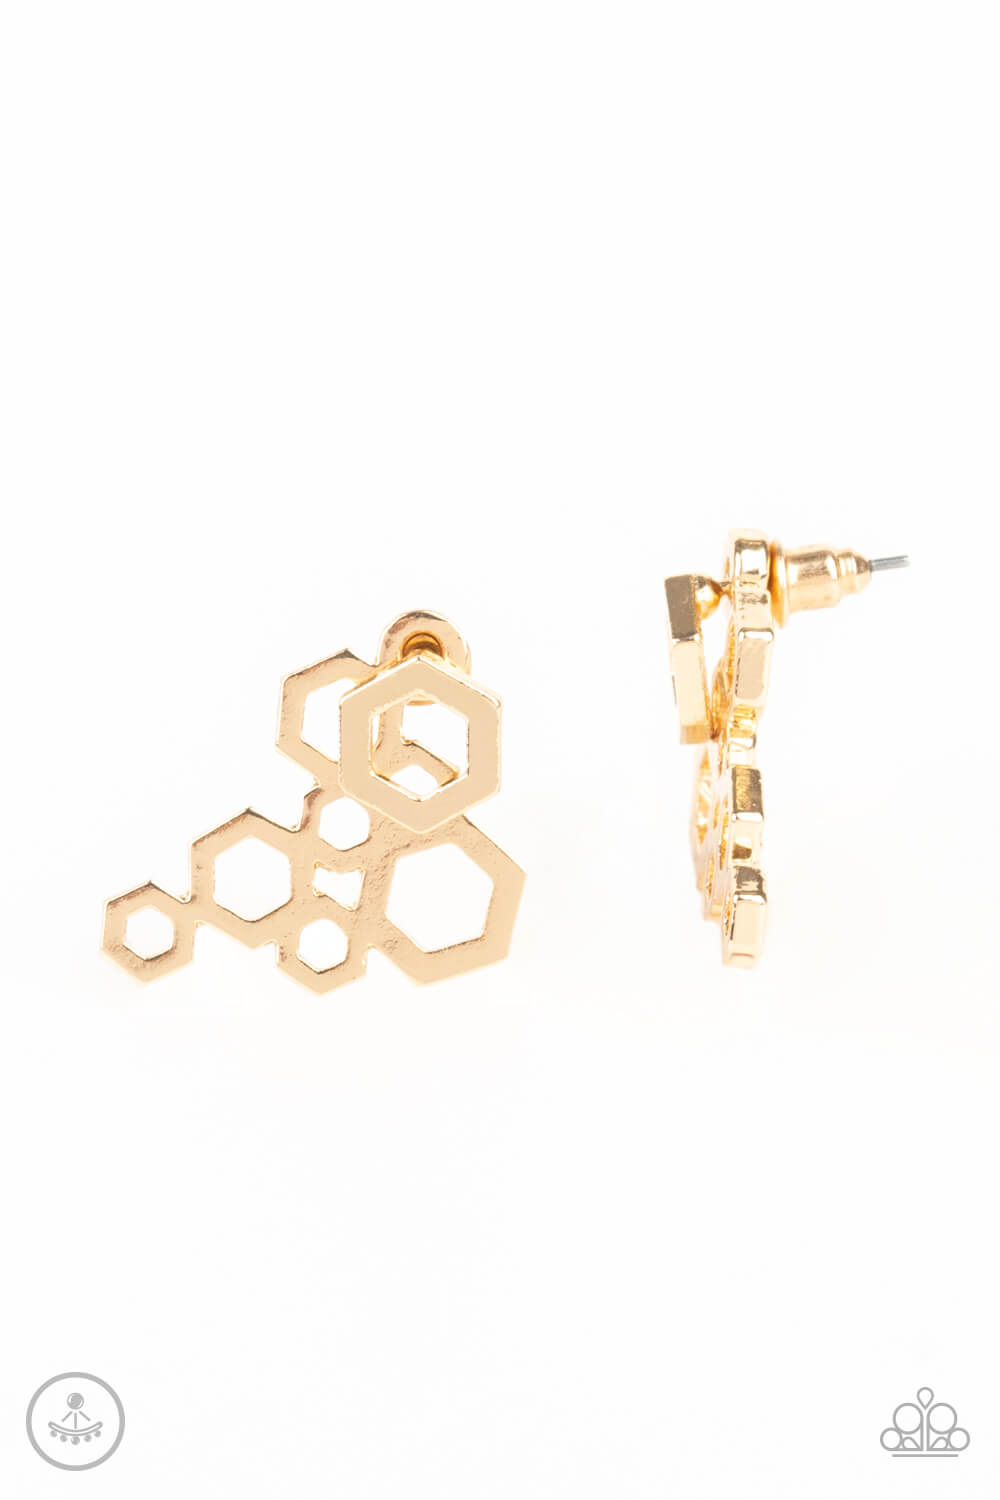 Six-Sided Shimmer - Gold Earrings - Princess Glam Shop